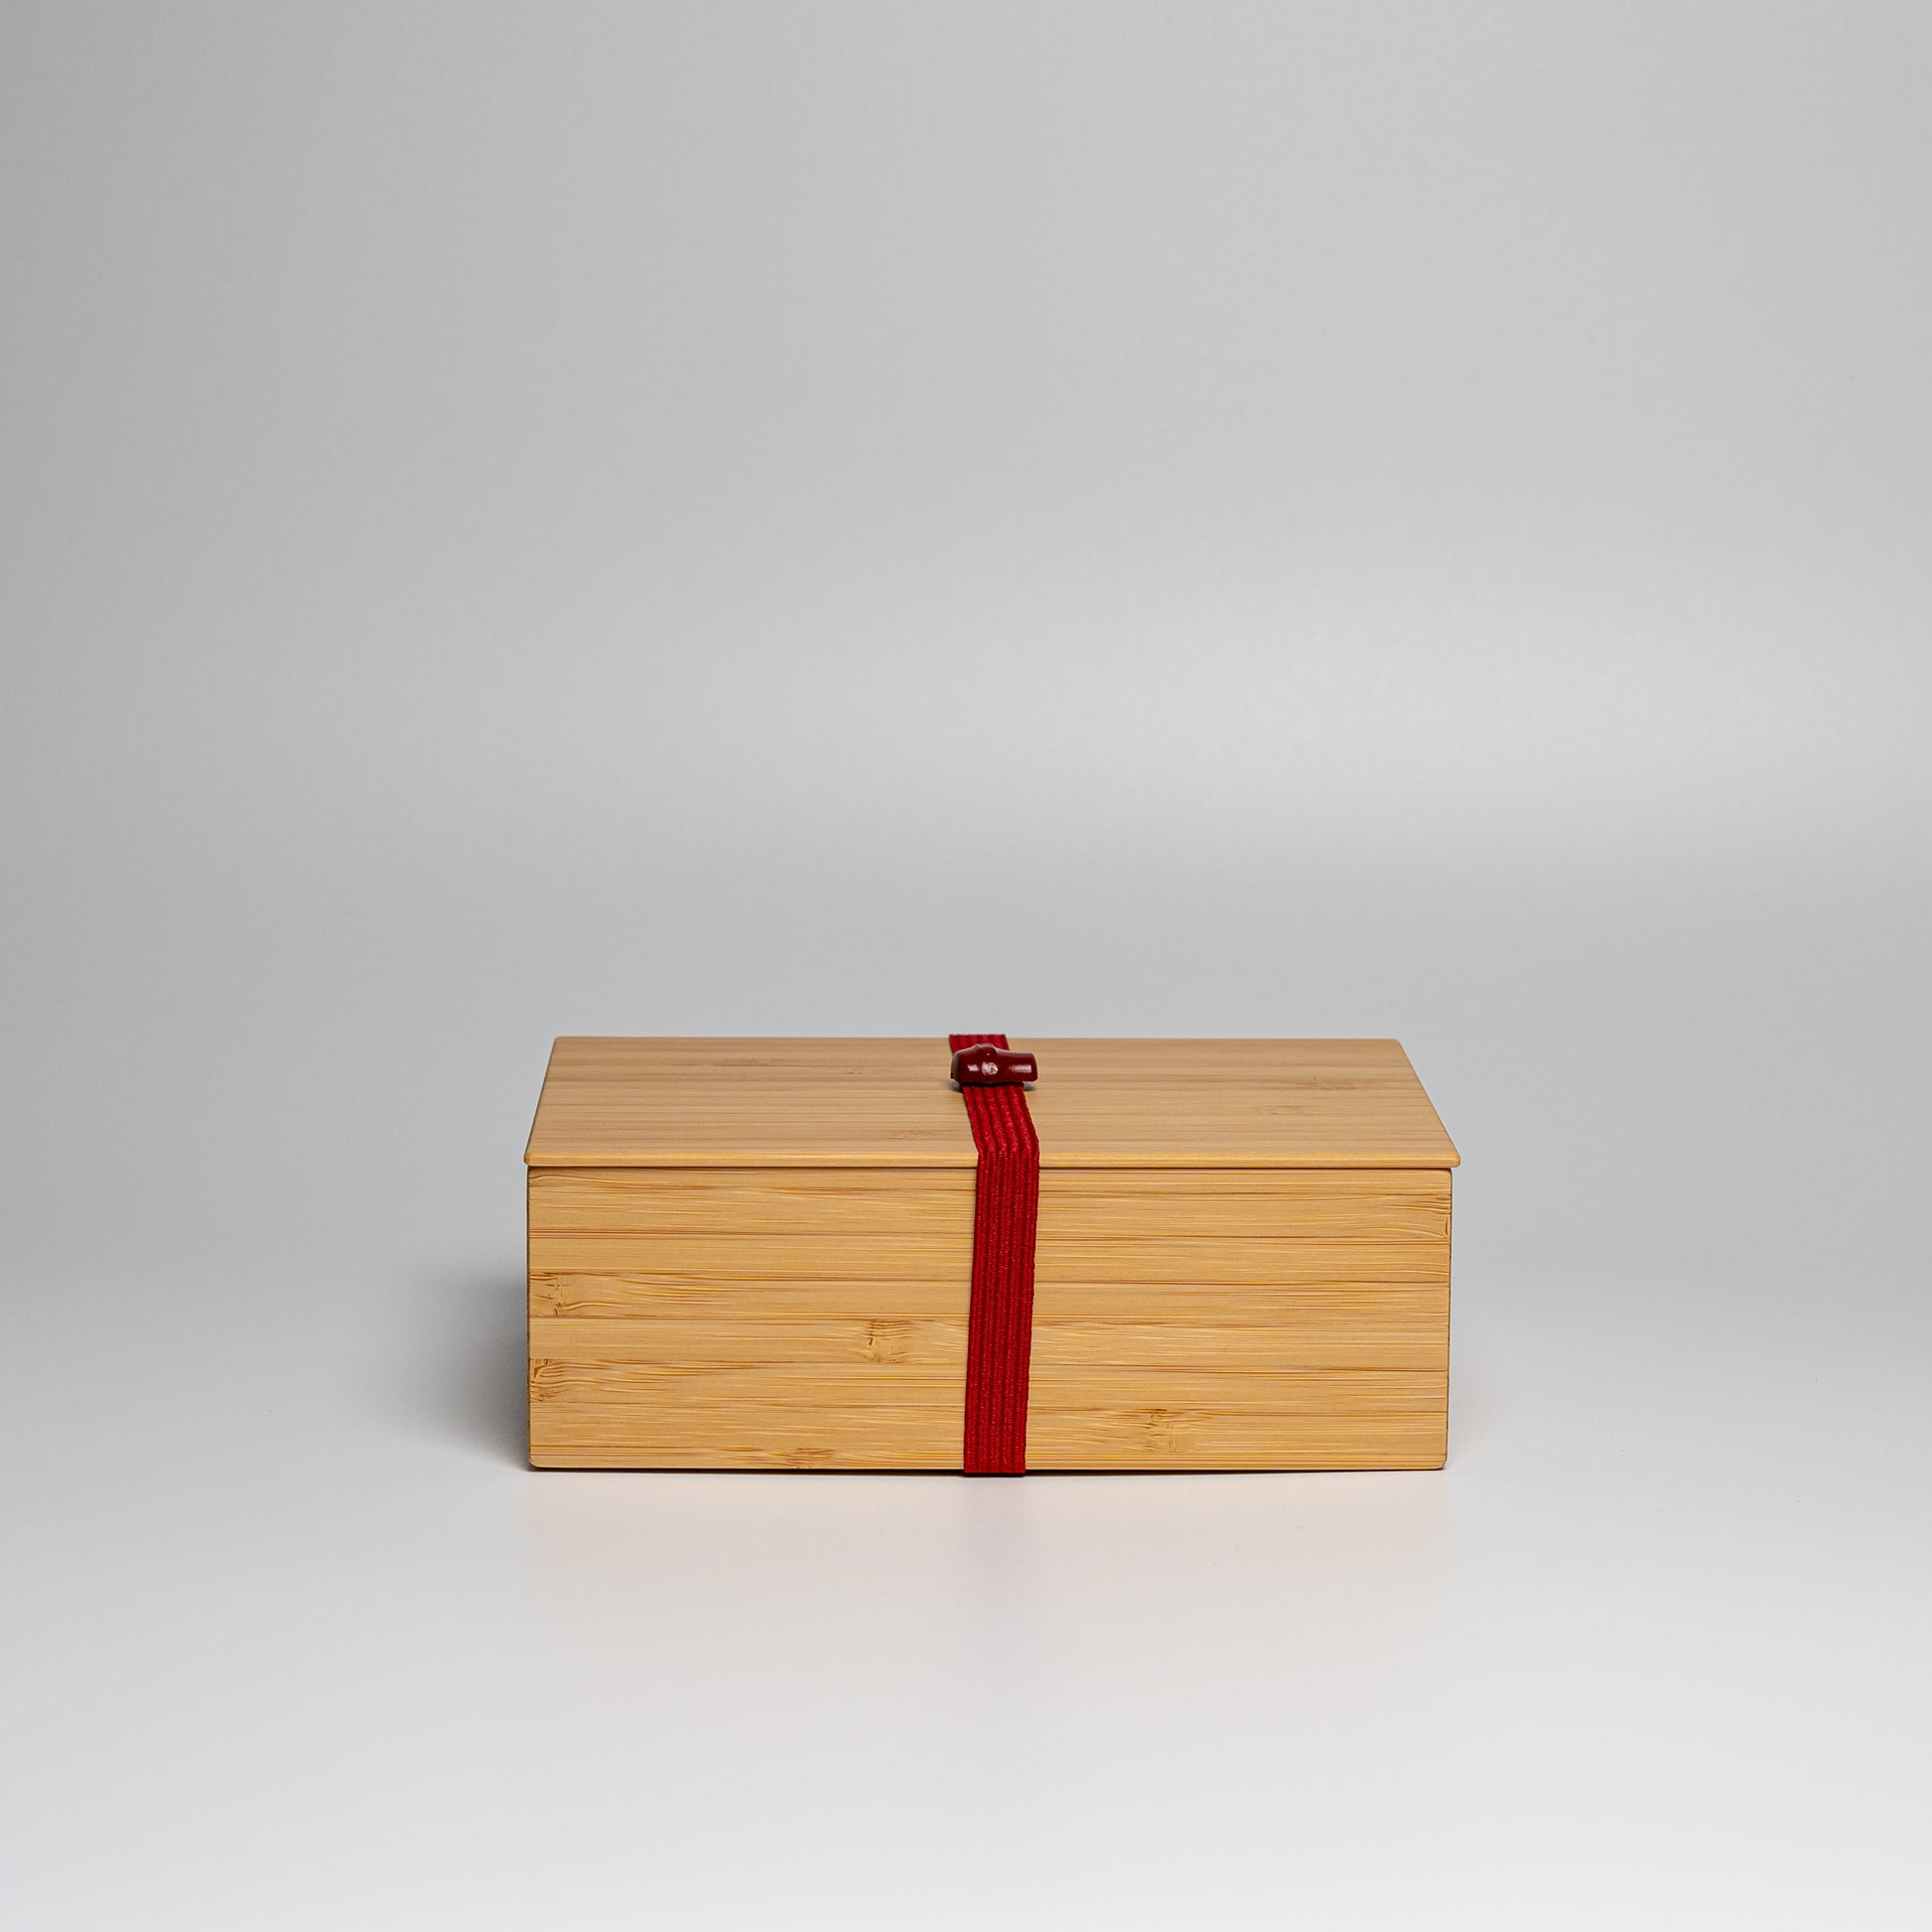 A bamboo bento box with red strap on a white background